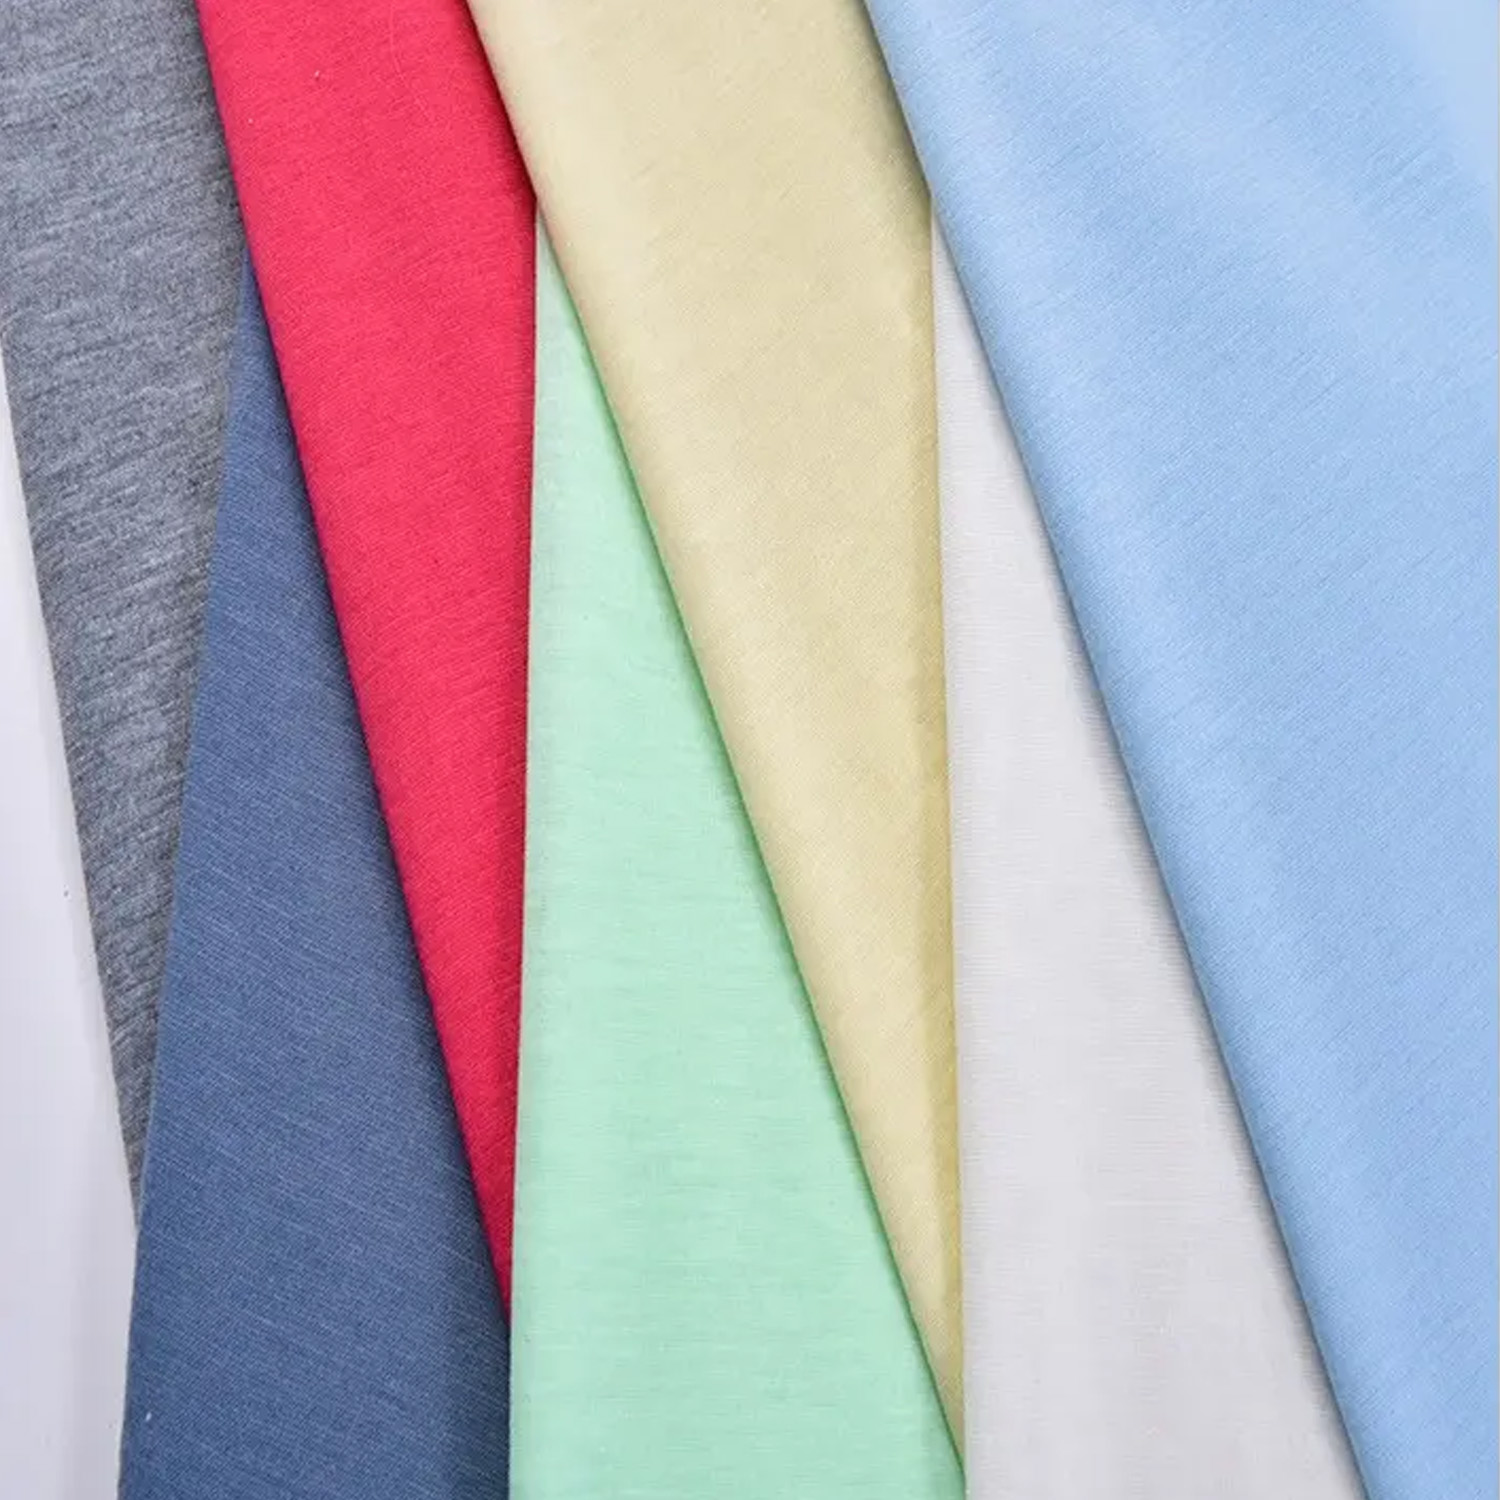 Single Knit 100% Poly Jersey Fabric for Athletic Sports Wear